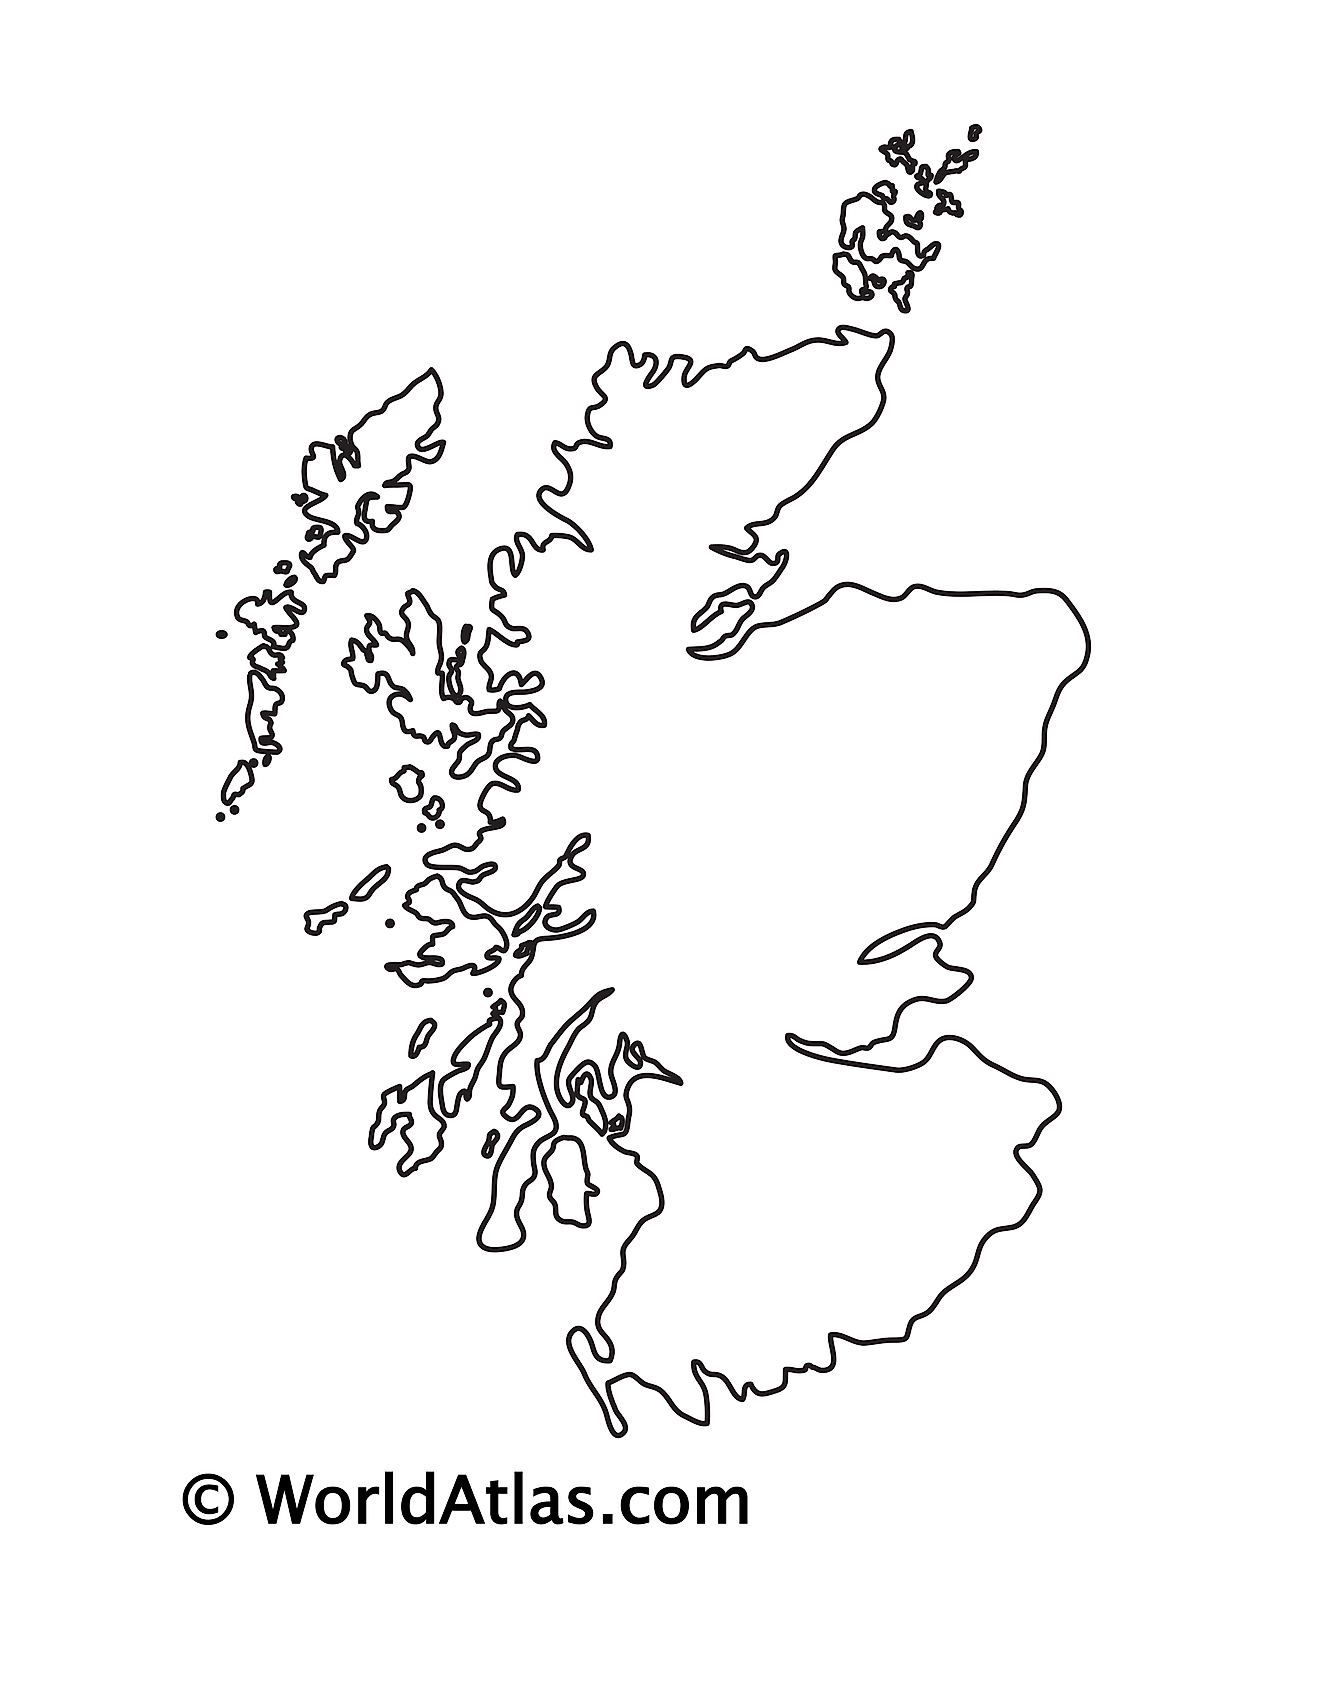 Blank Outline Map of Scotland